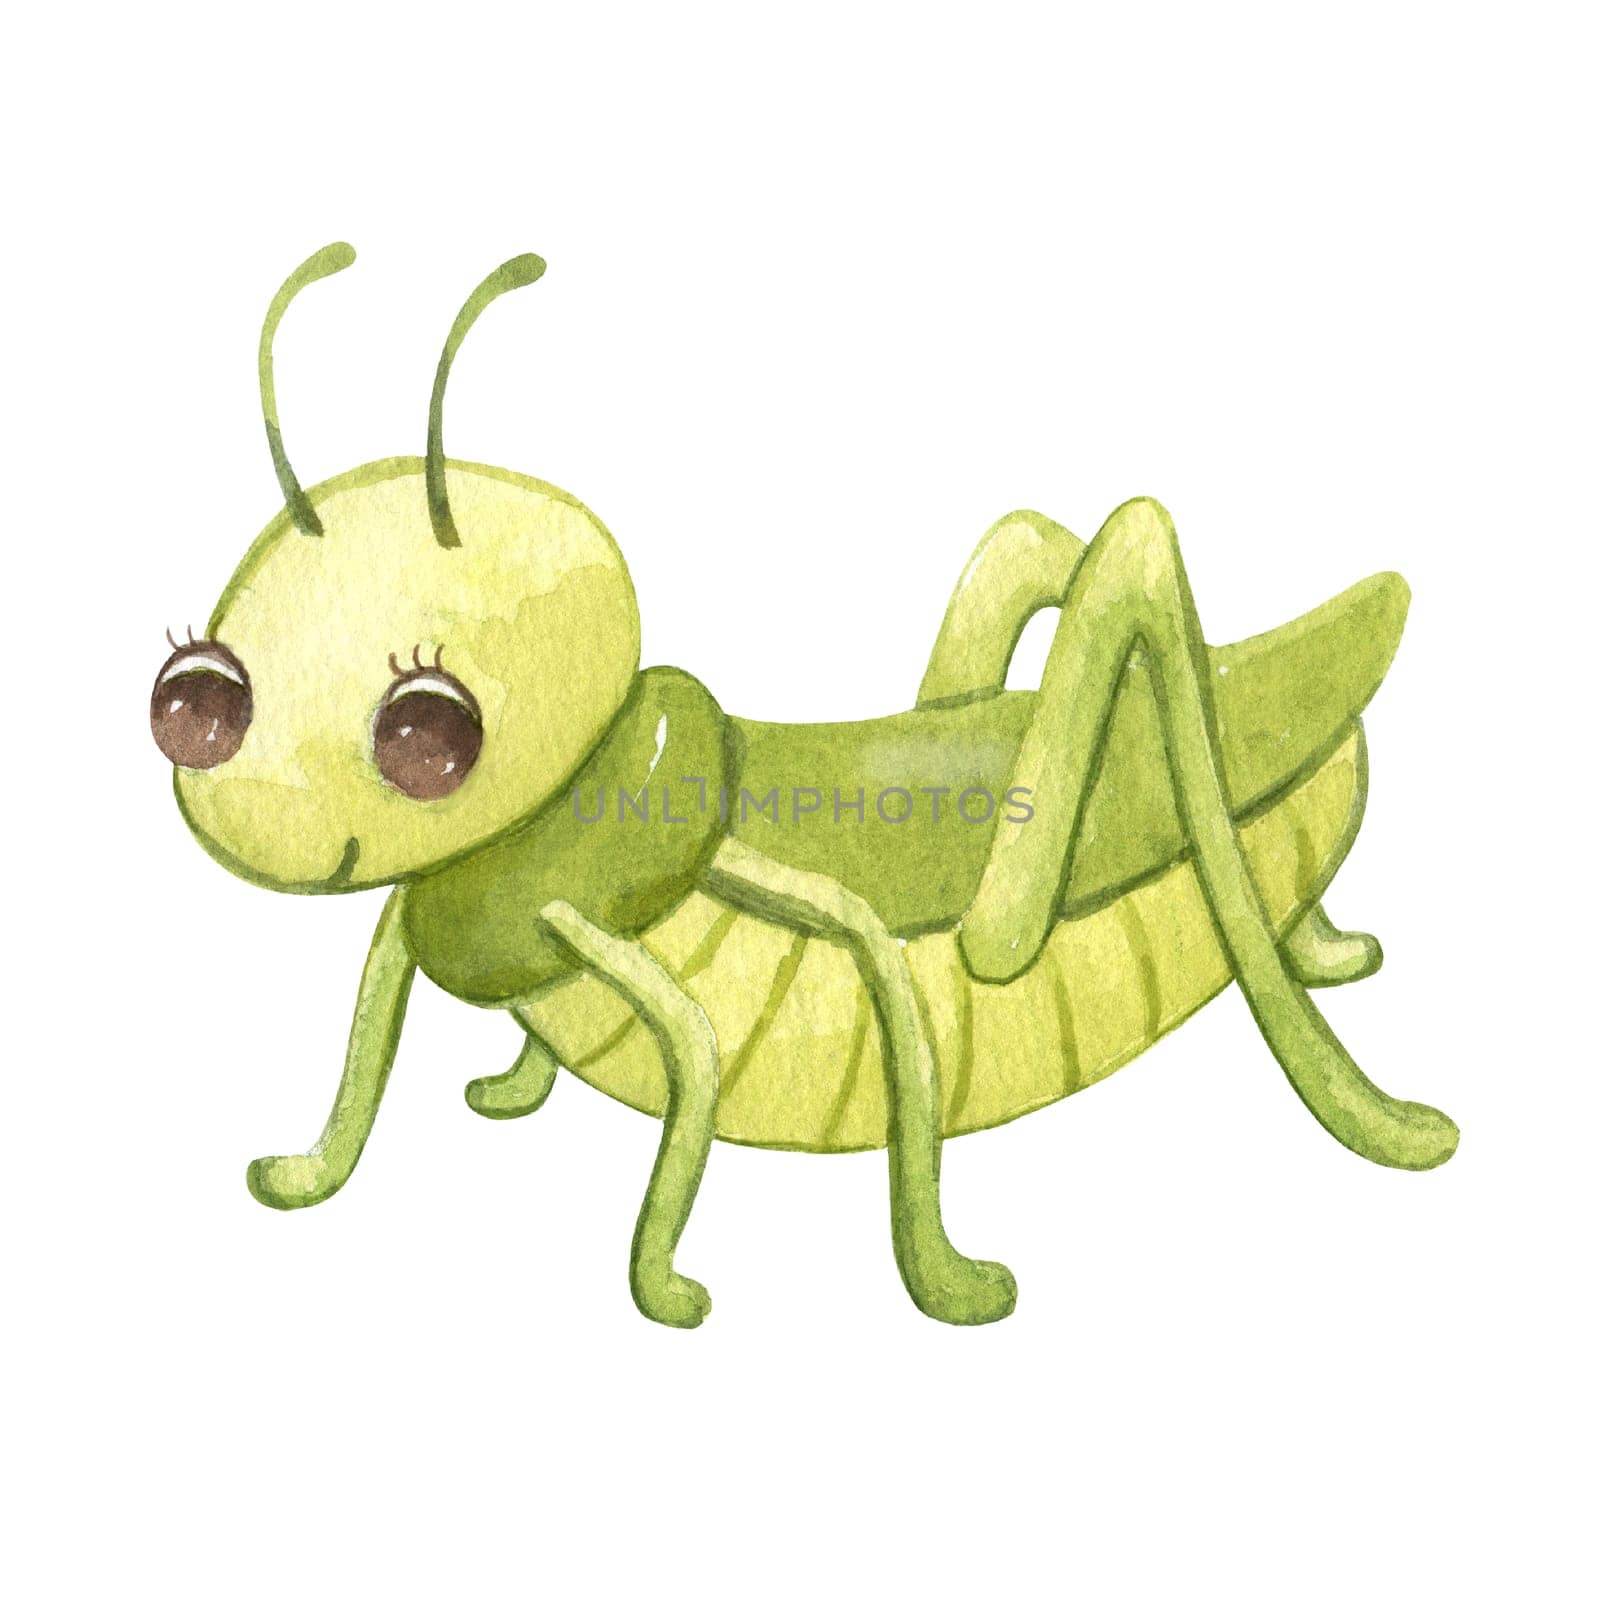 Cute smiling grasshopper isolated on white. Funny insect for children. Watercolor cartoon illustration by ElenaPlatova